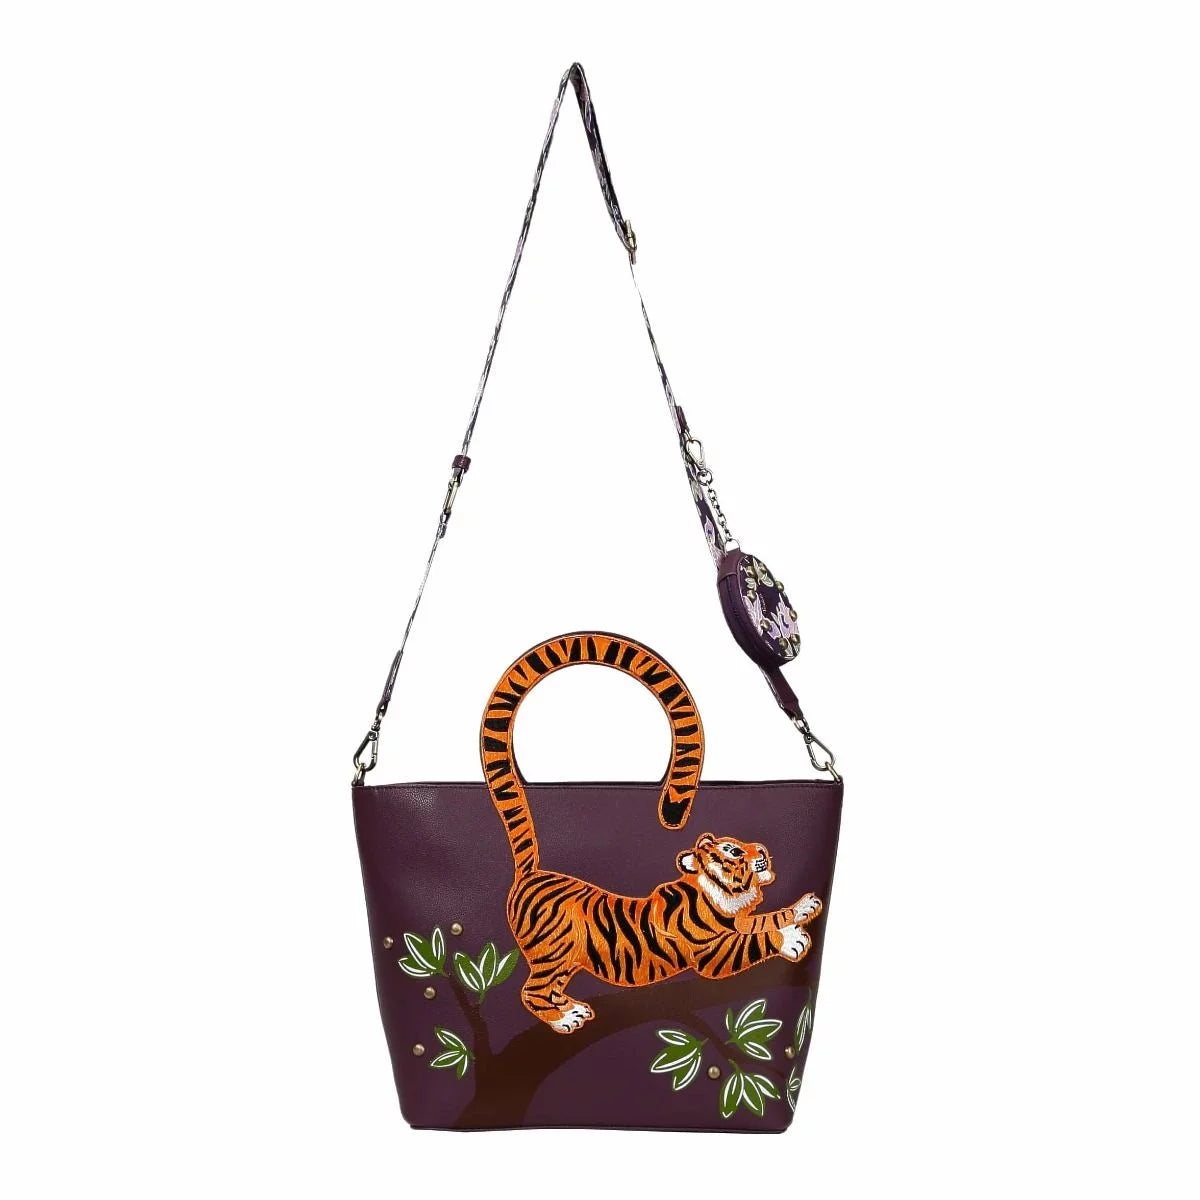 Animal Park - Tiger Cut Out Handle Tote